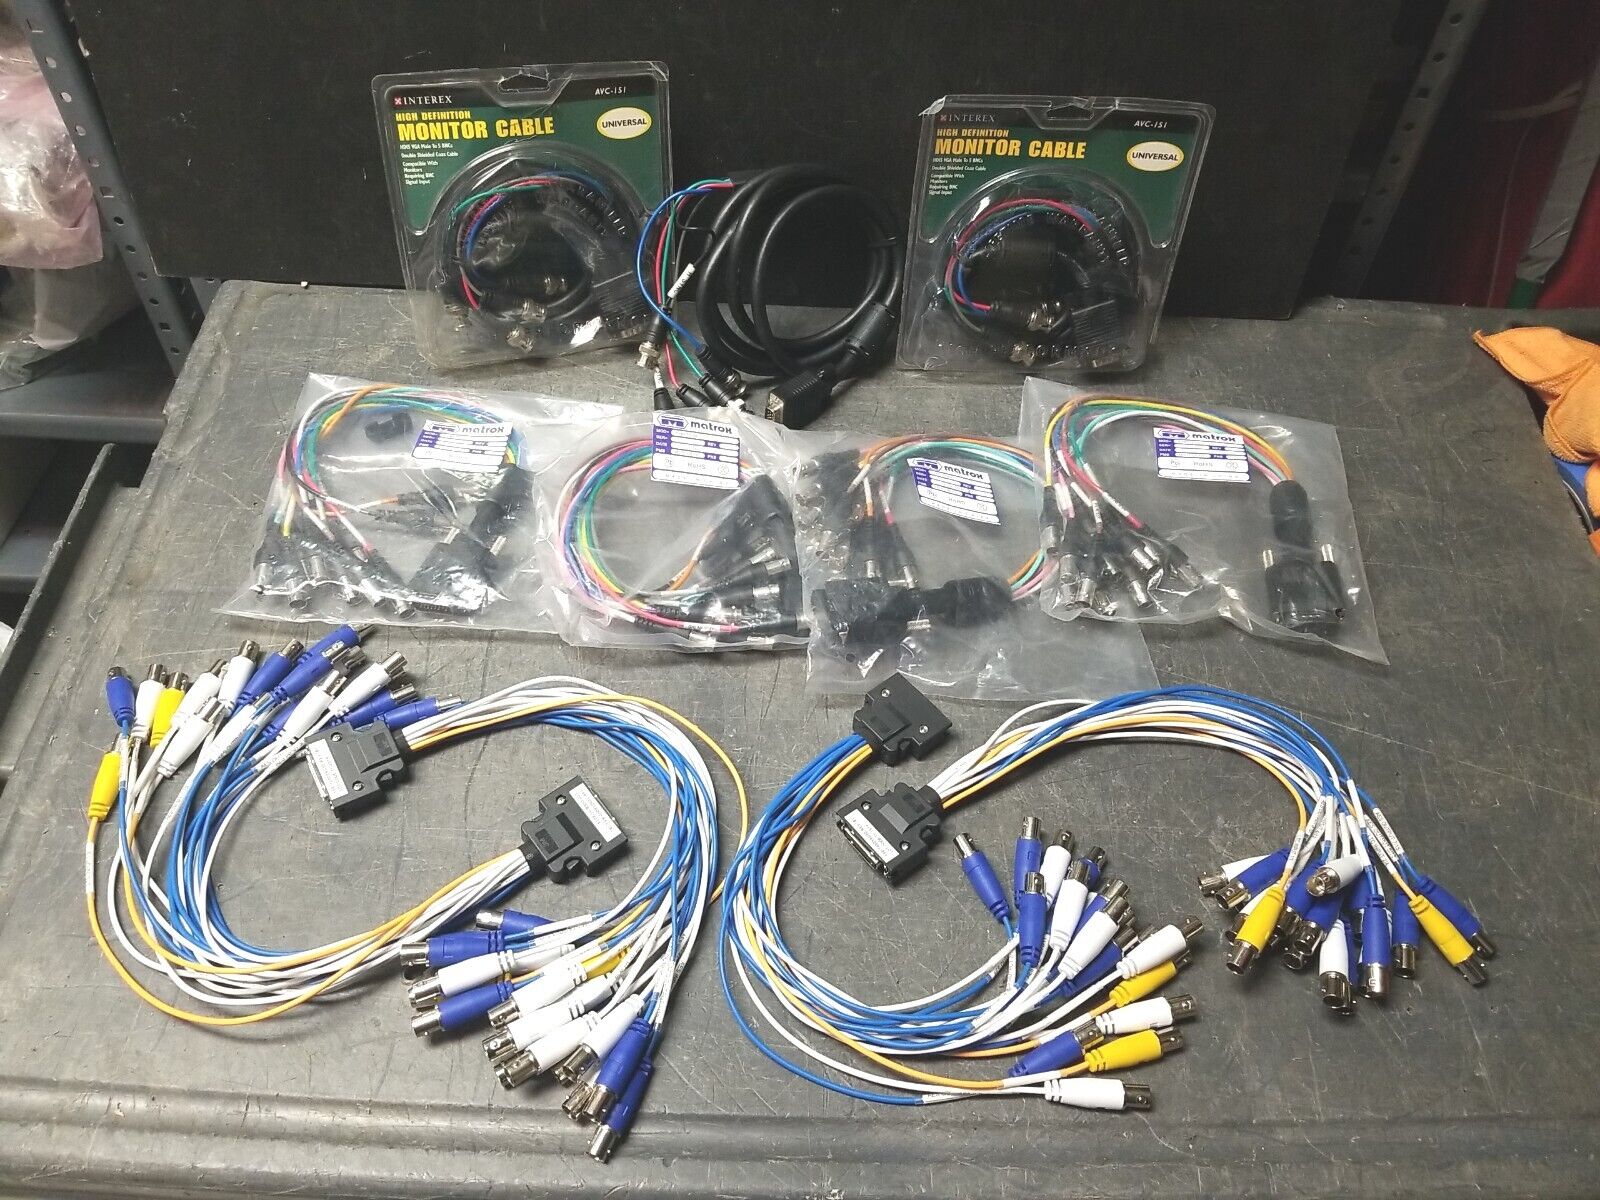 Lot of Monitor Cables & Break out Cables